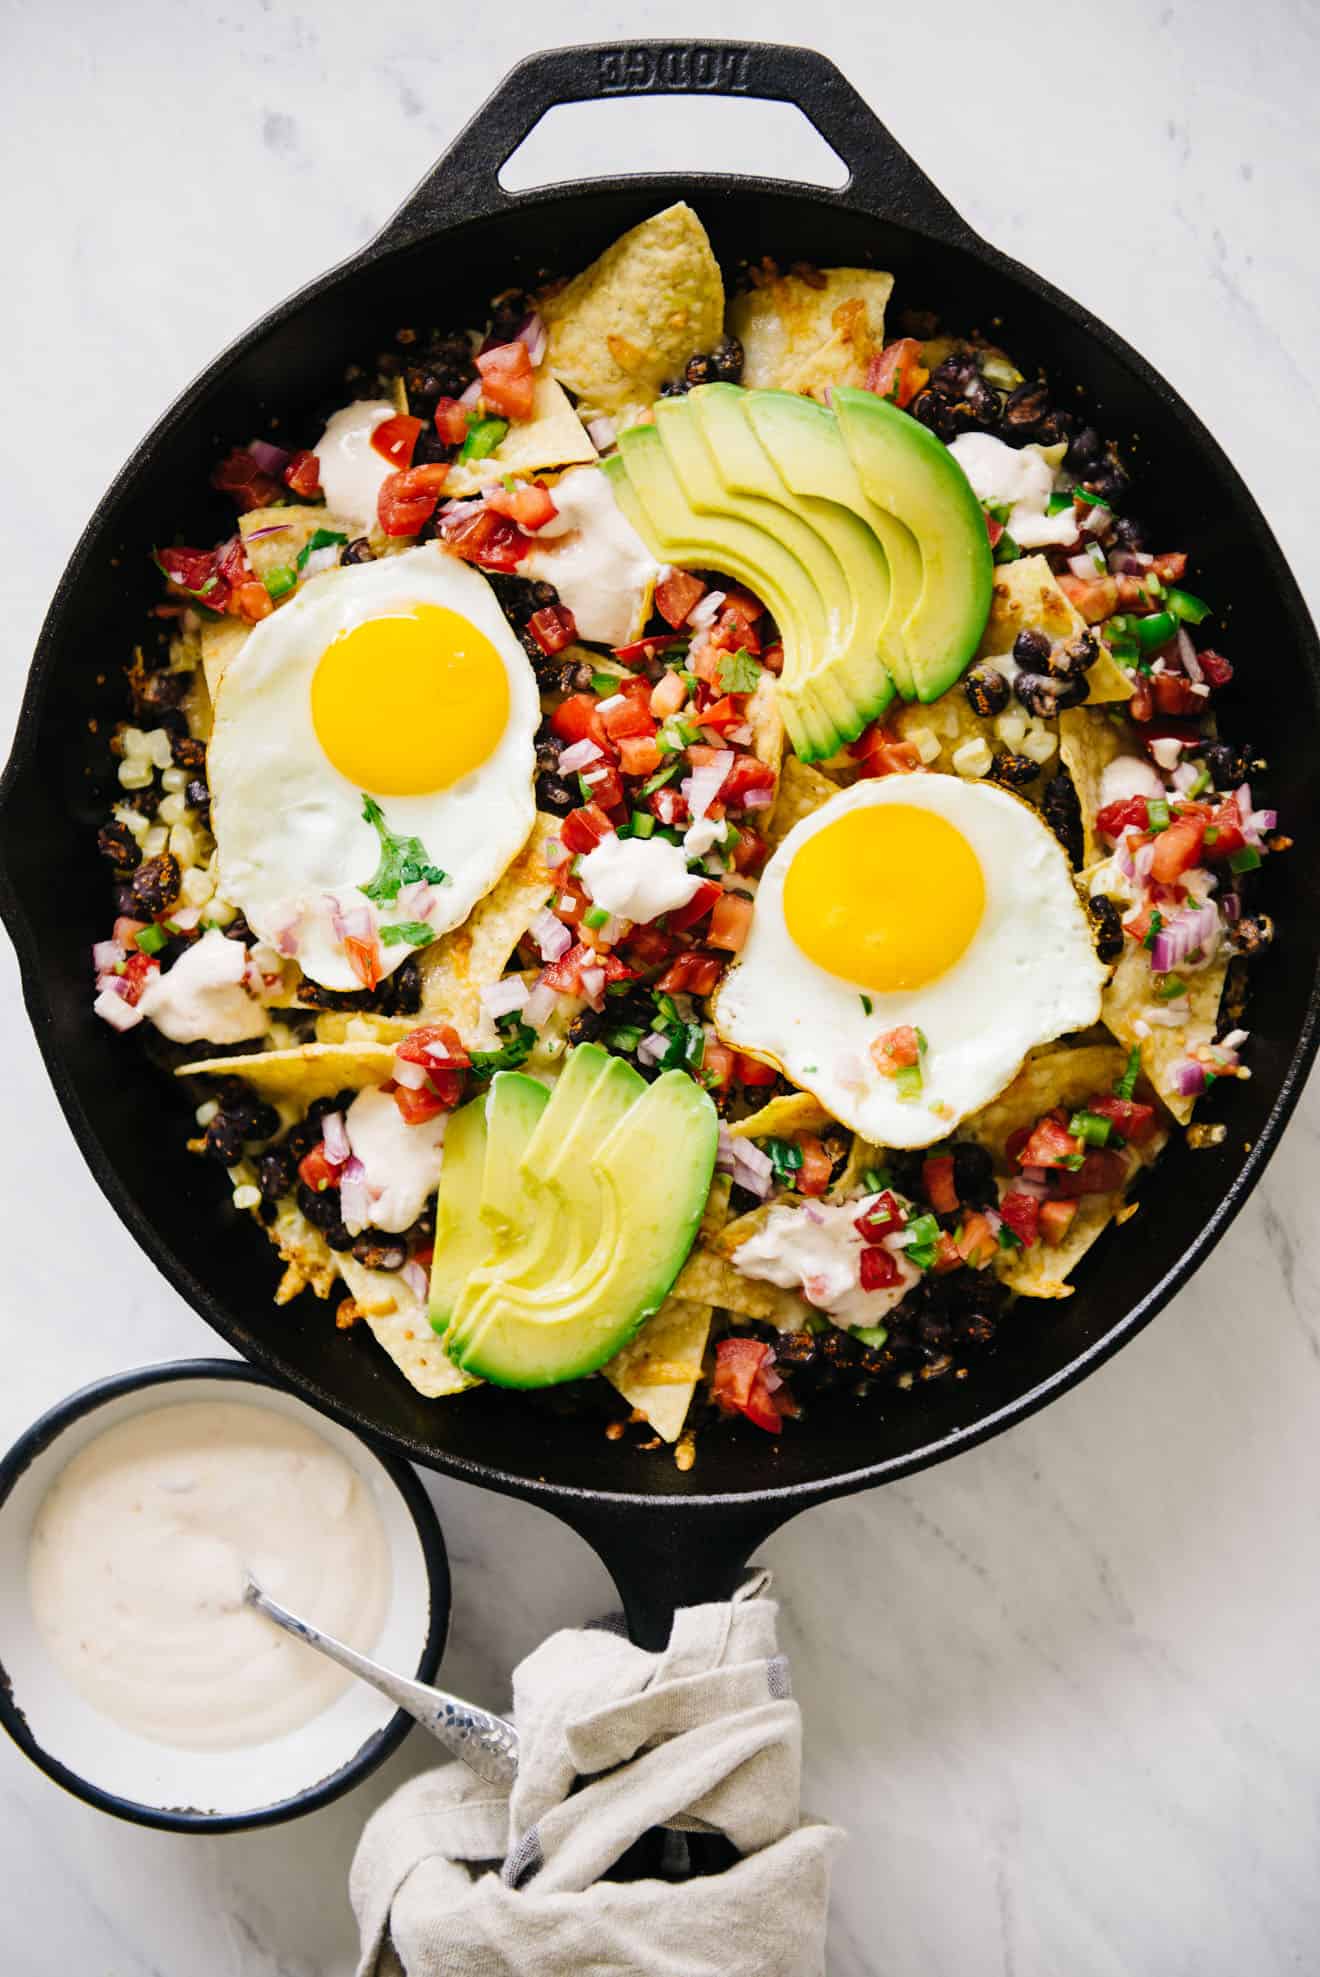 Loaded Breakfast Nachos - easy gluten-free meal in 20 minutes! Perfect for brunch